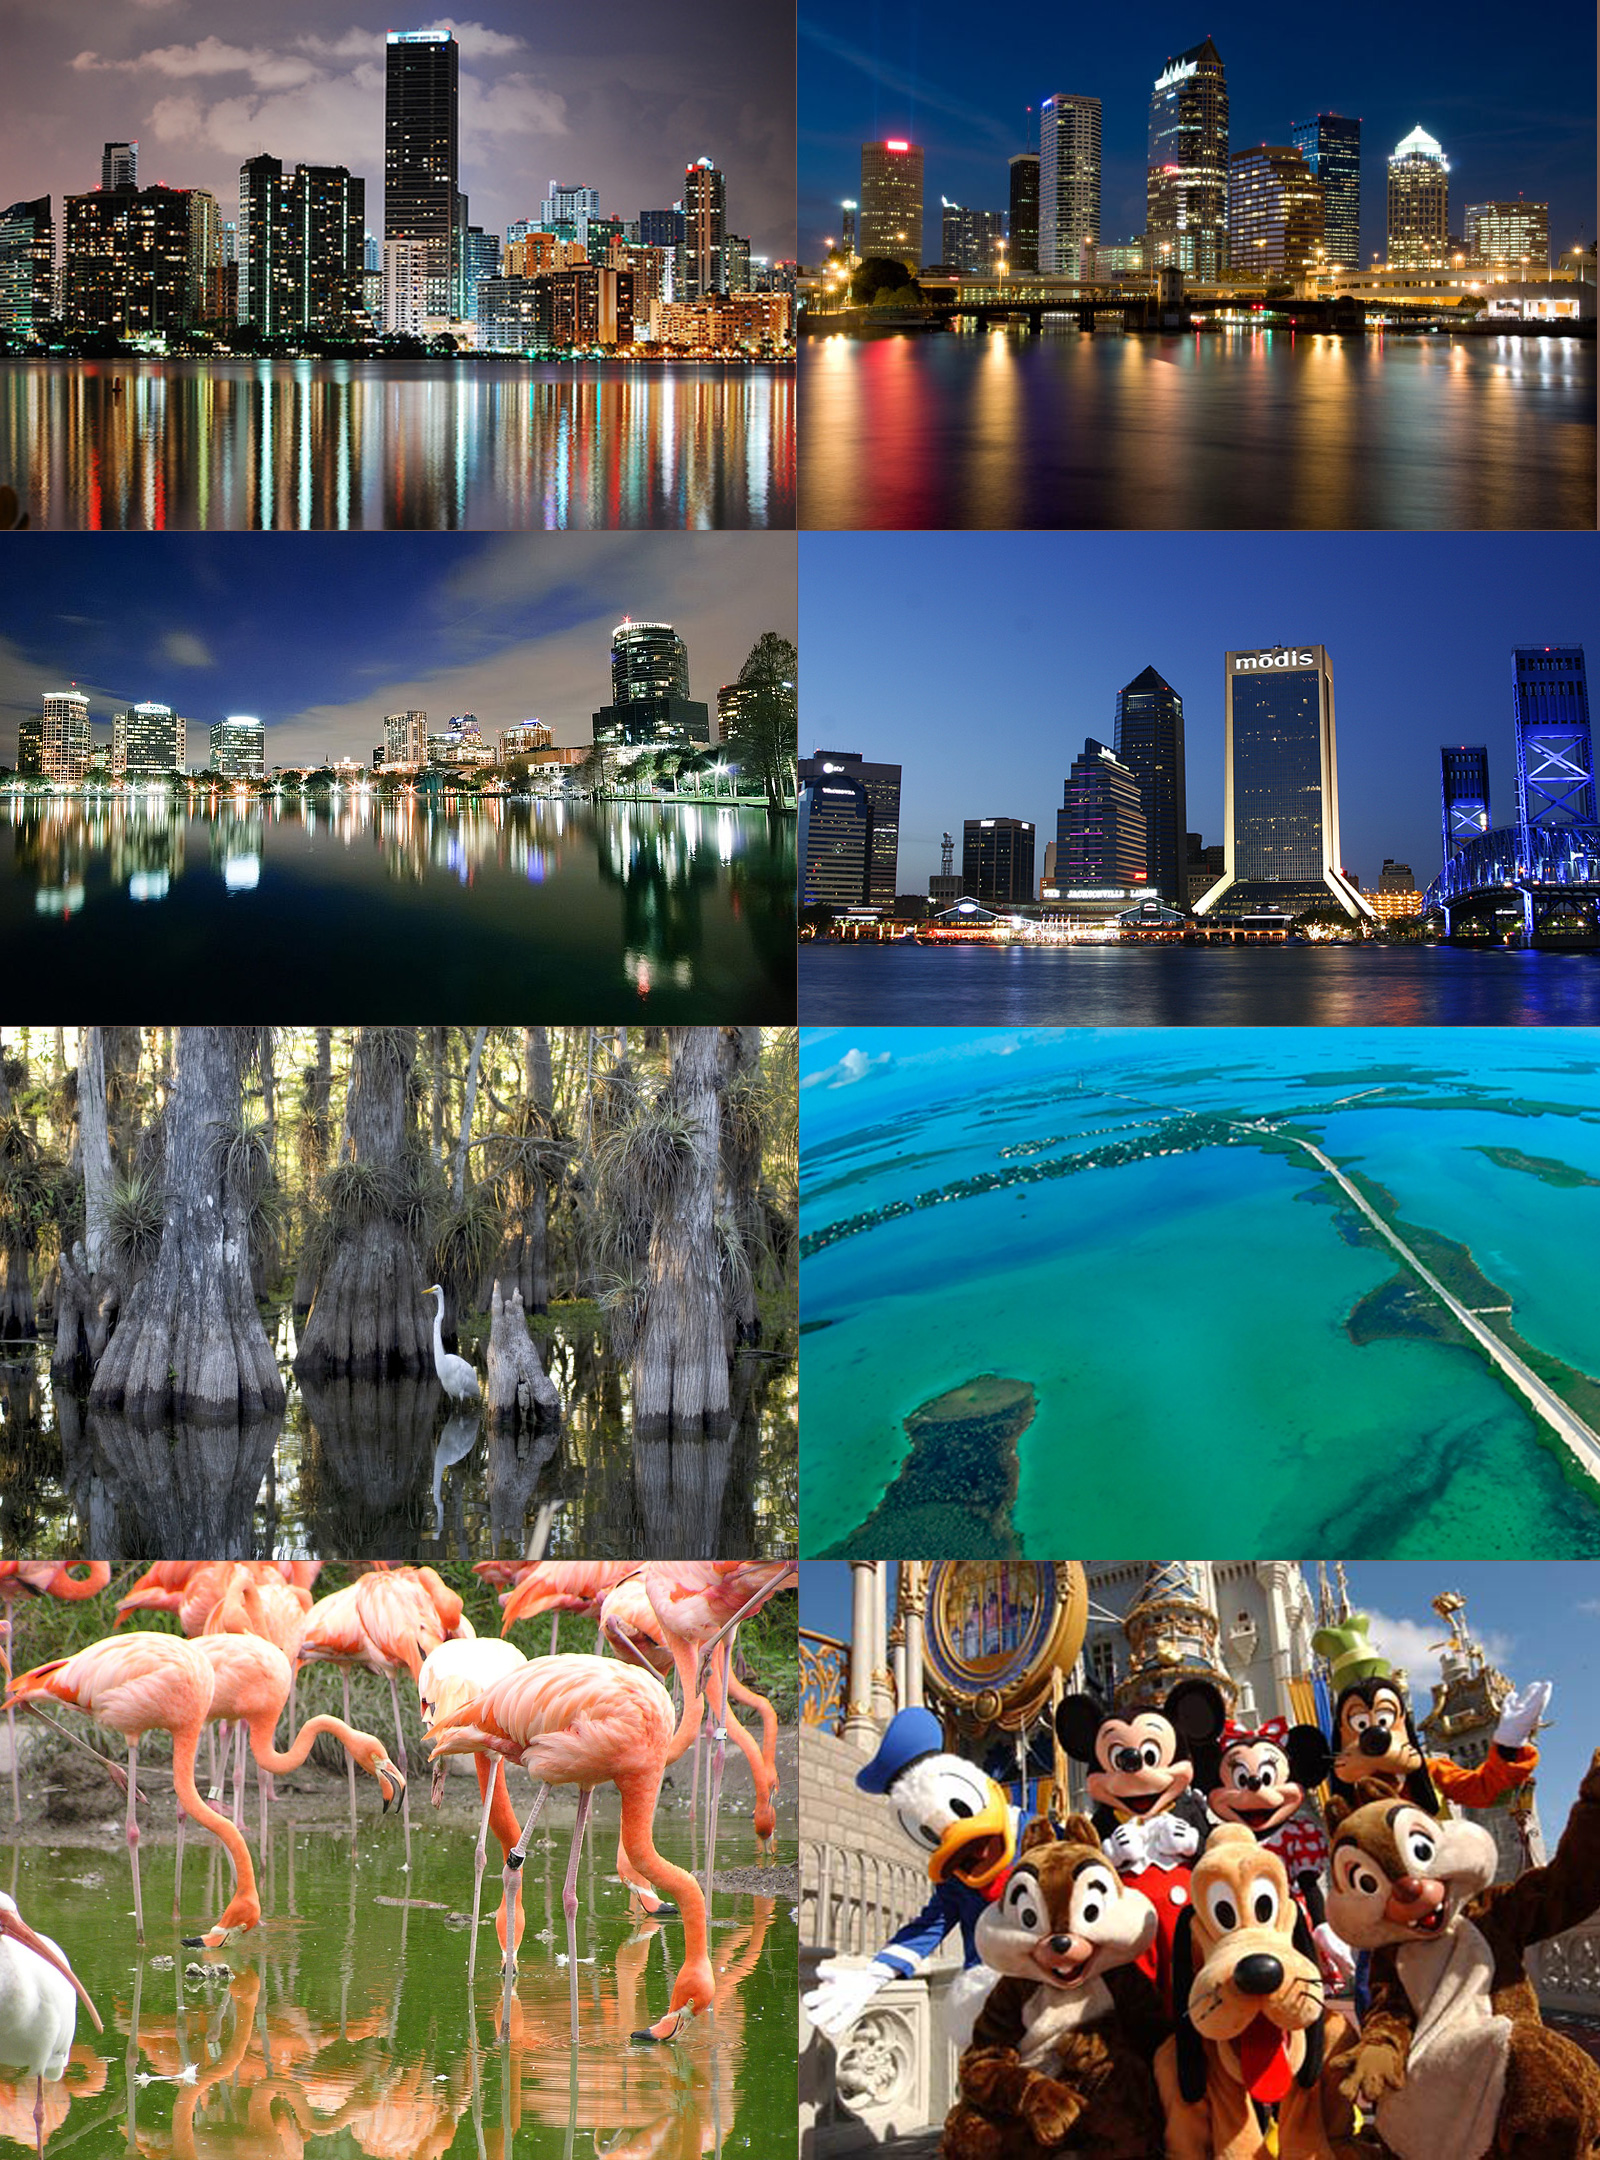 Florida is a state in the southeastern region of the United States, bordered to the west by the Gulf of Mexico, to the north by Alabama and Georgia and to the east by the Atlantic Ocean